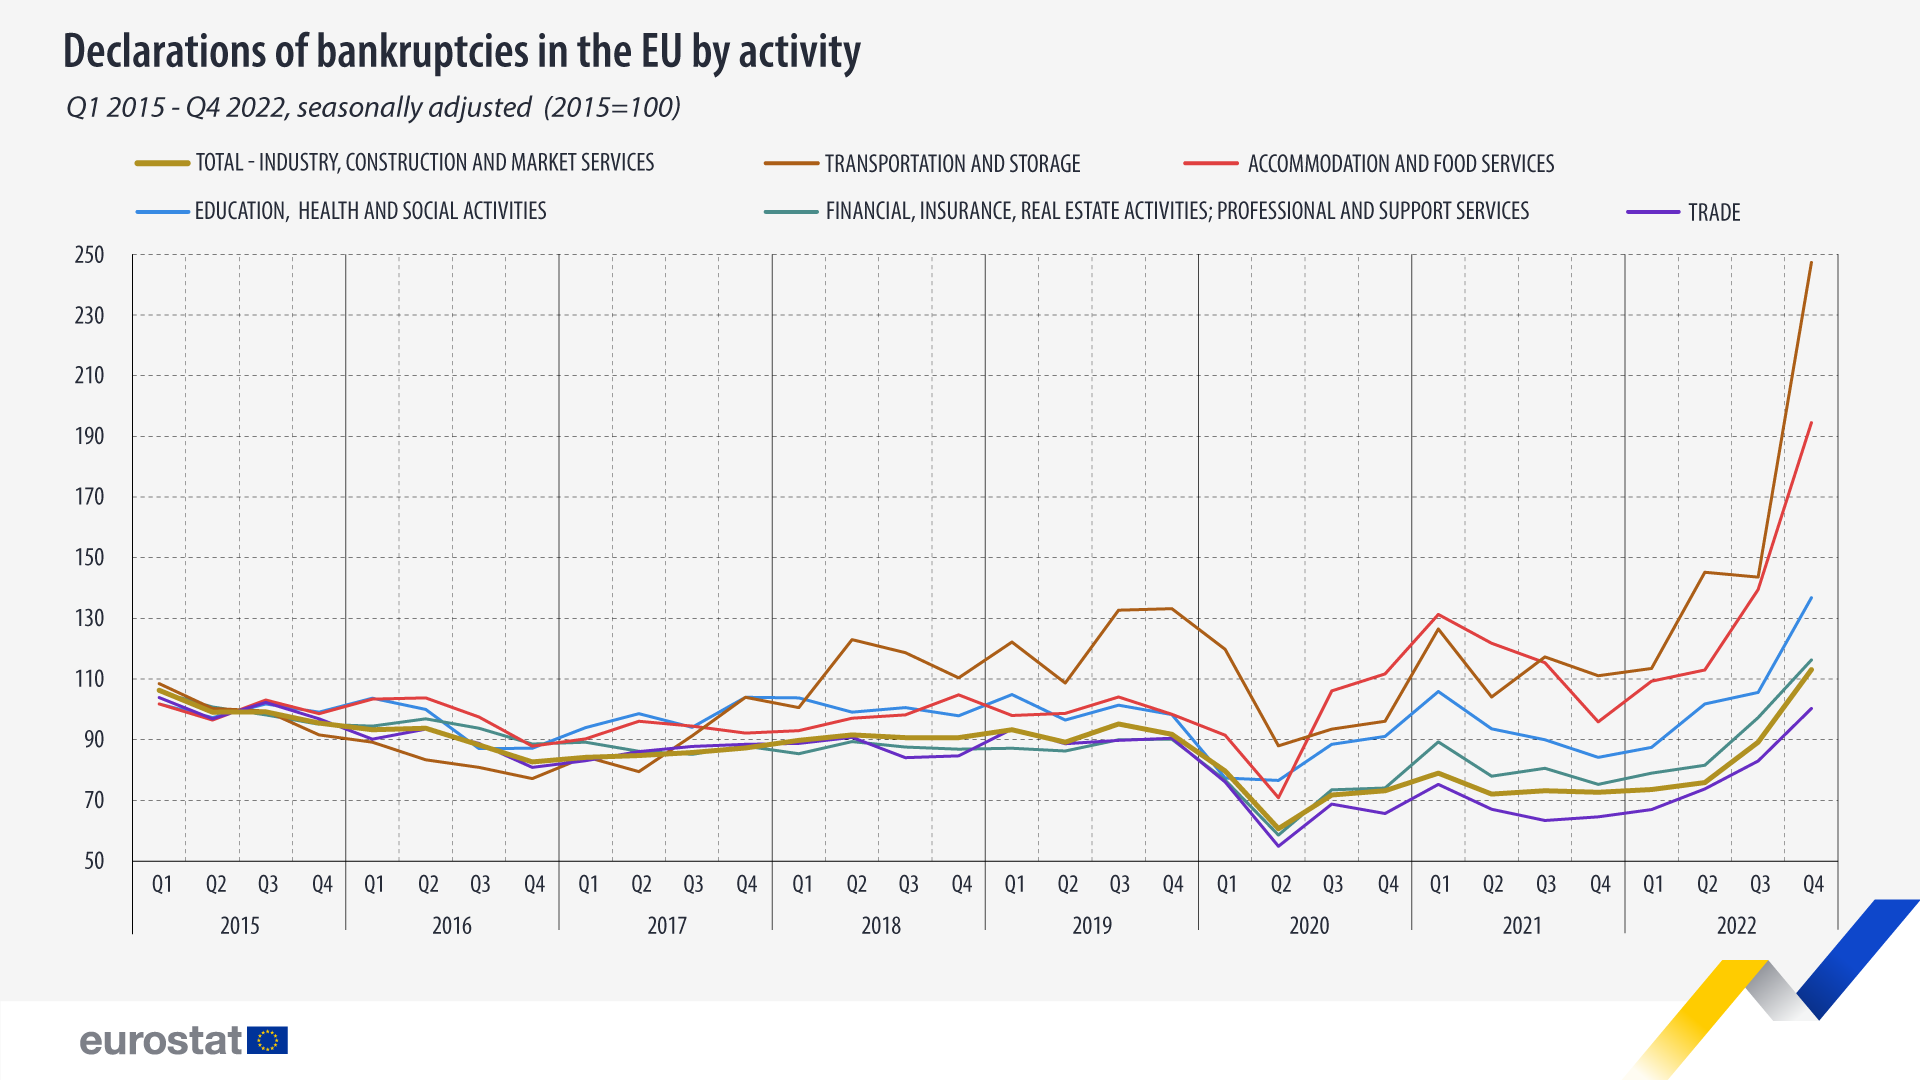 Line graph: Declarations of bankruptcies in the EU by activity, seasonally adjusted, 2015=100, Q1 2015-Q4 2022